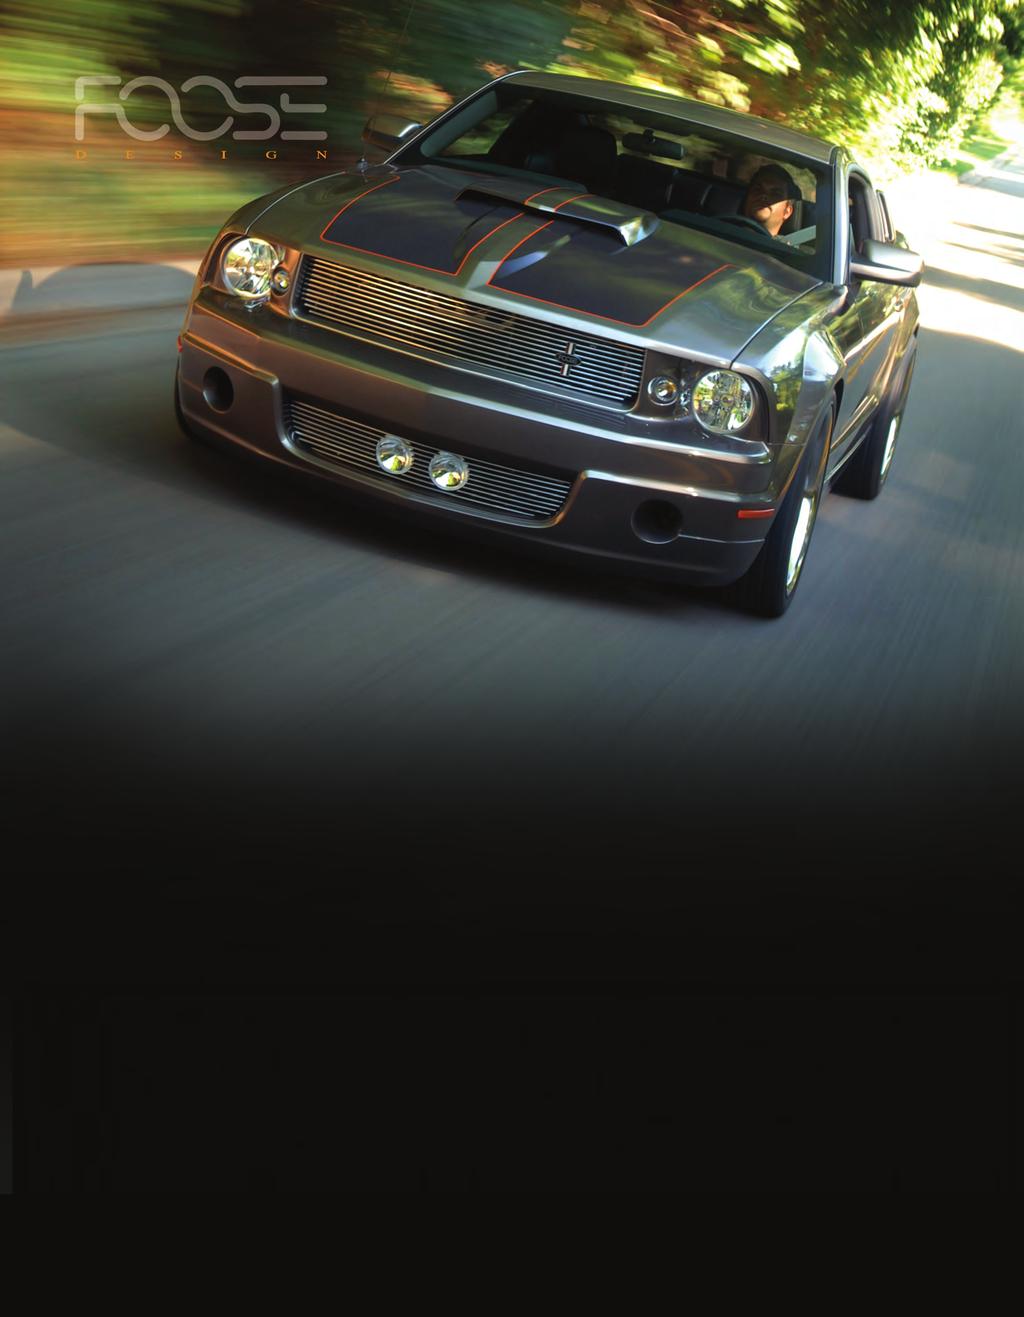 The 2007 Foose Stallion Limited Edition. Unlimited Style.